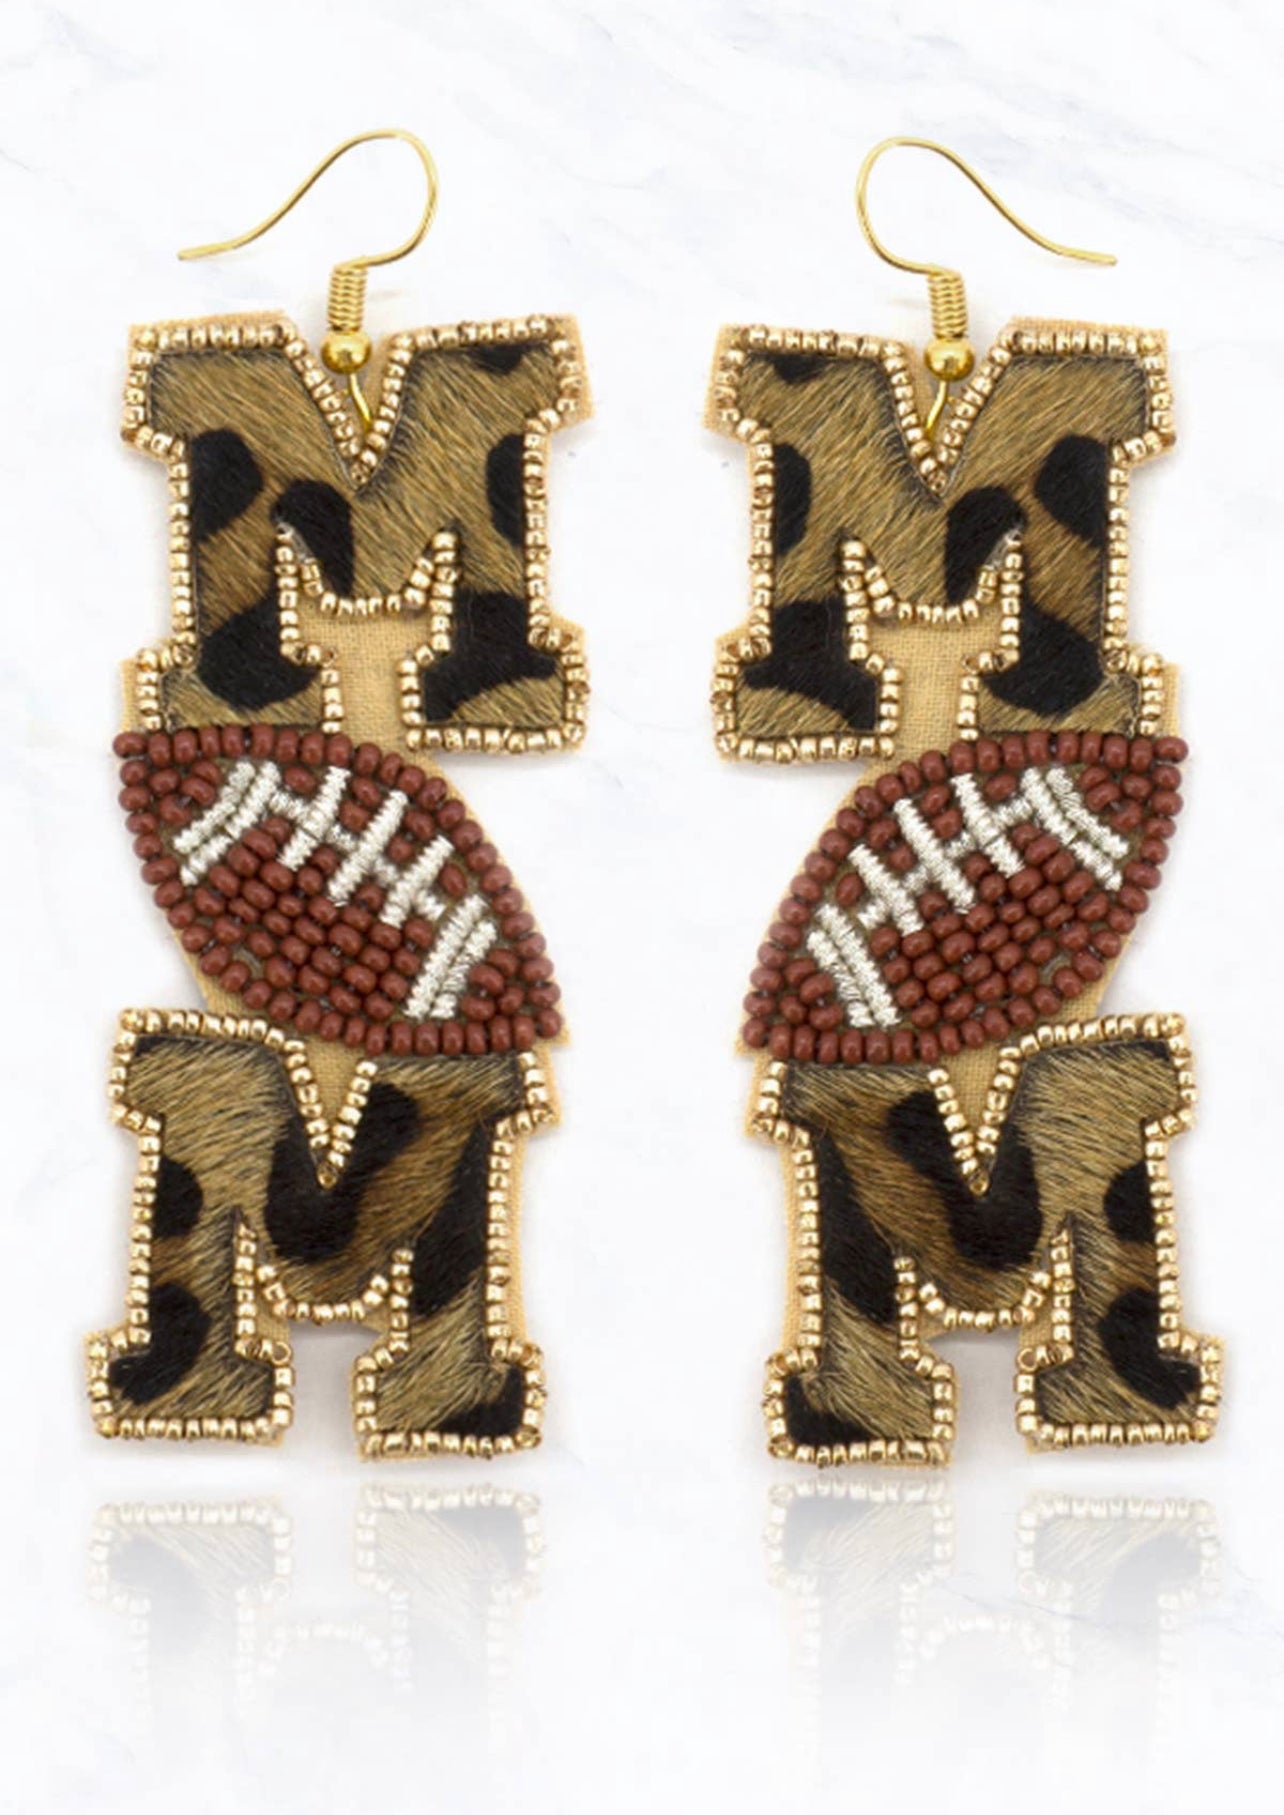 MOM FOOTBALL EARRINGS - Baby Bums Clothing 